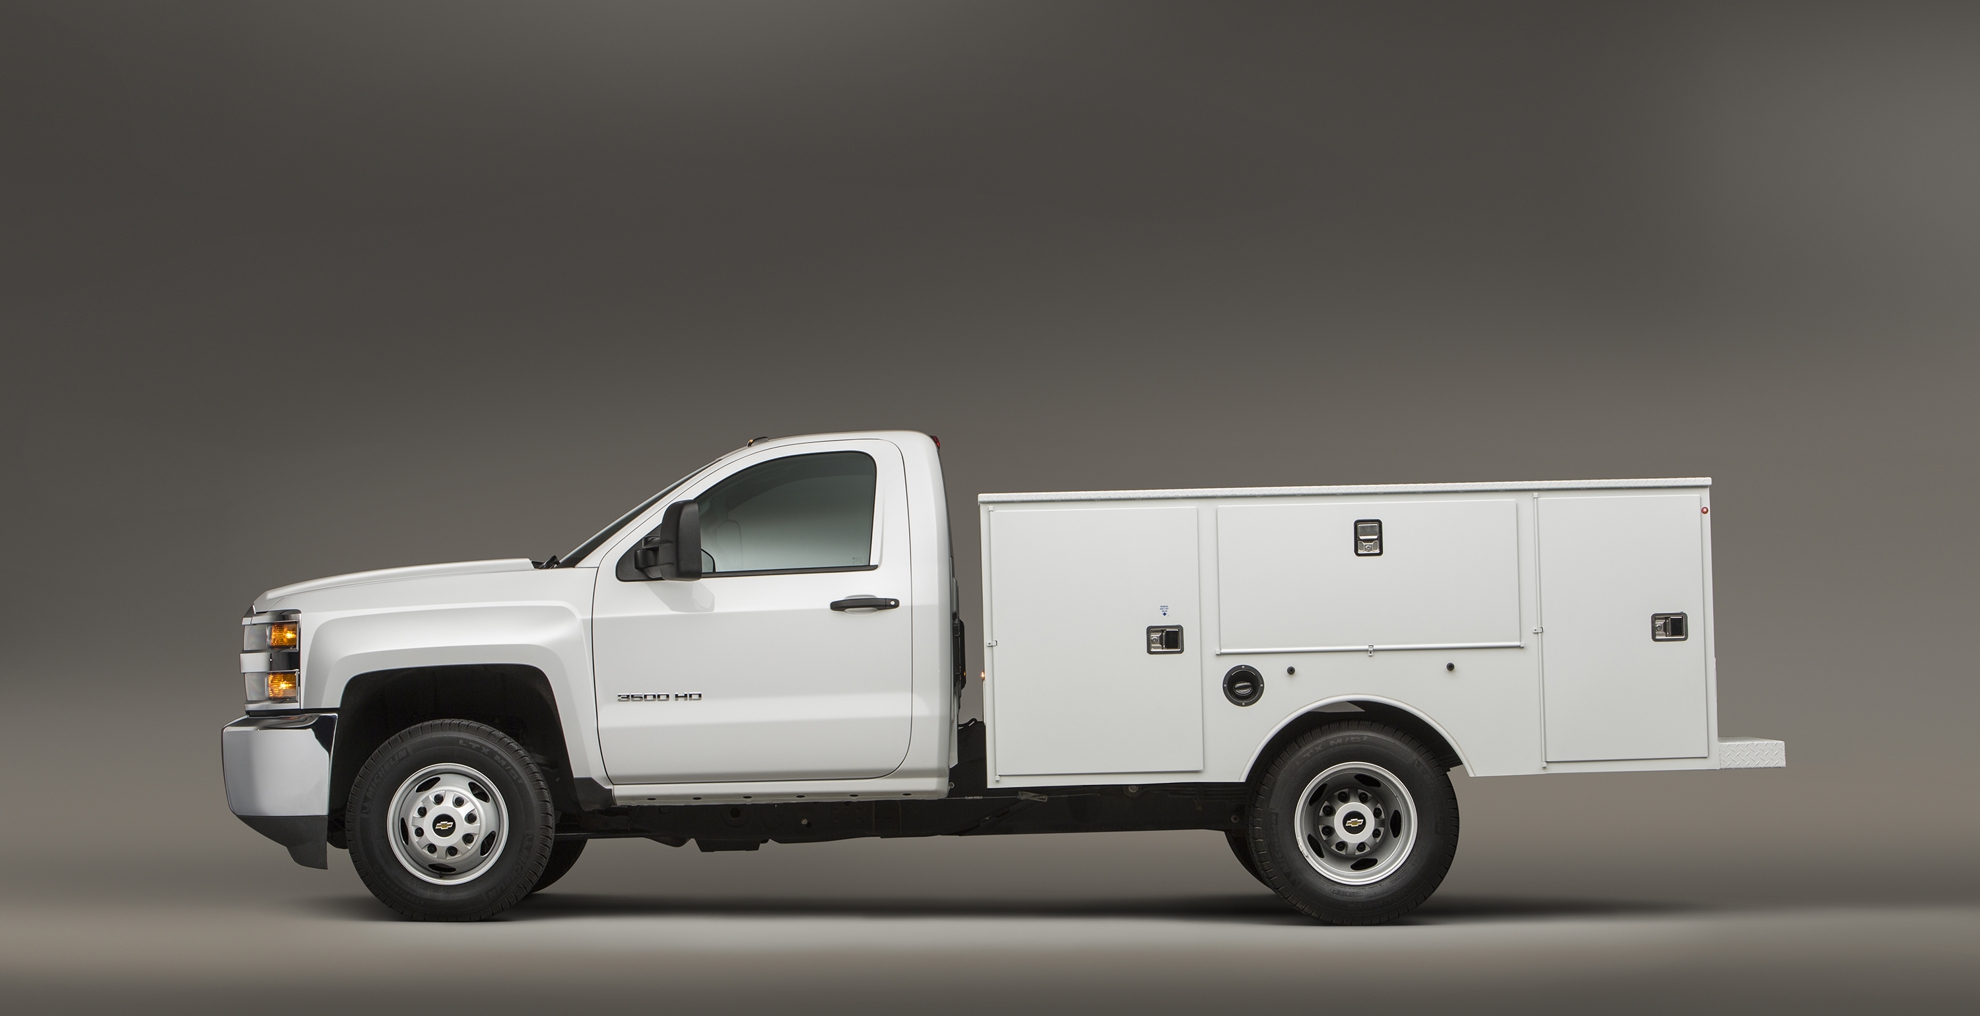 Chevrolet Silverado Chassis Cab Cleans Up with CNG